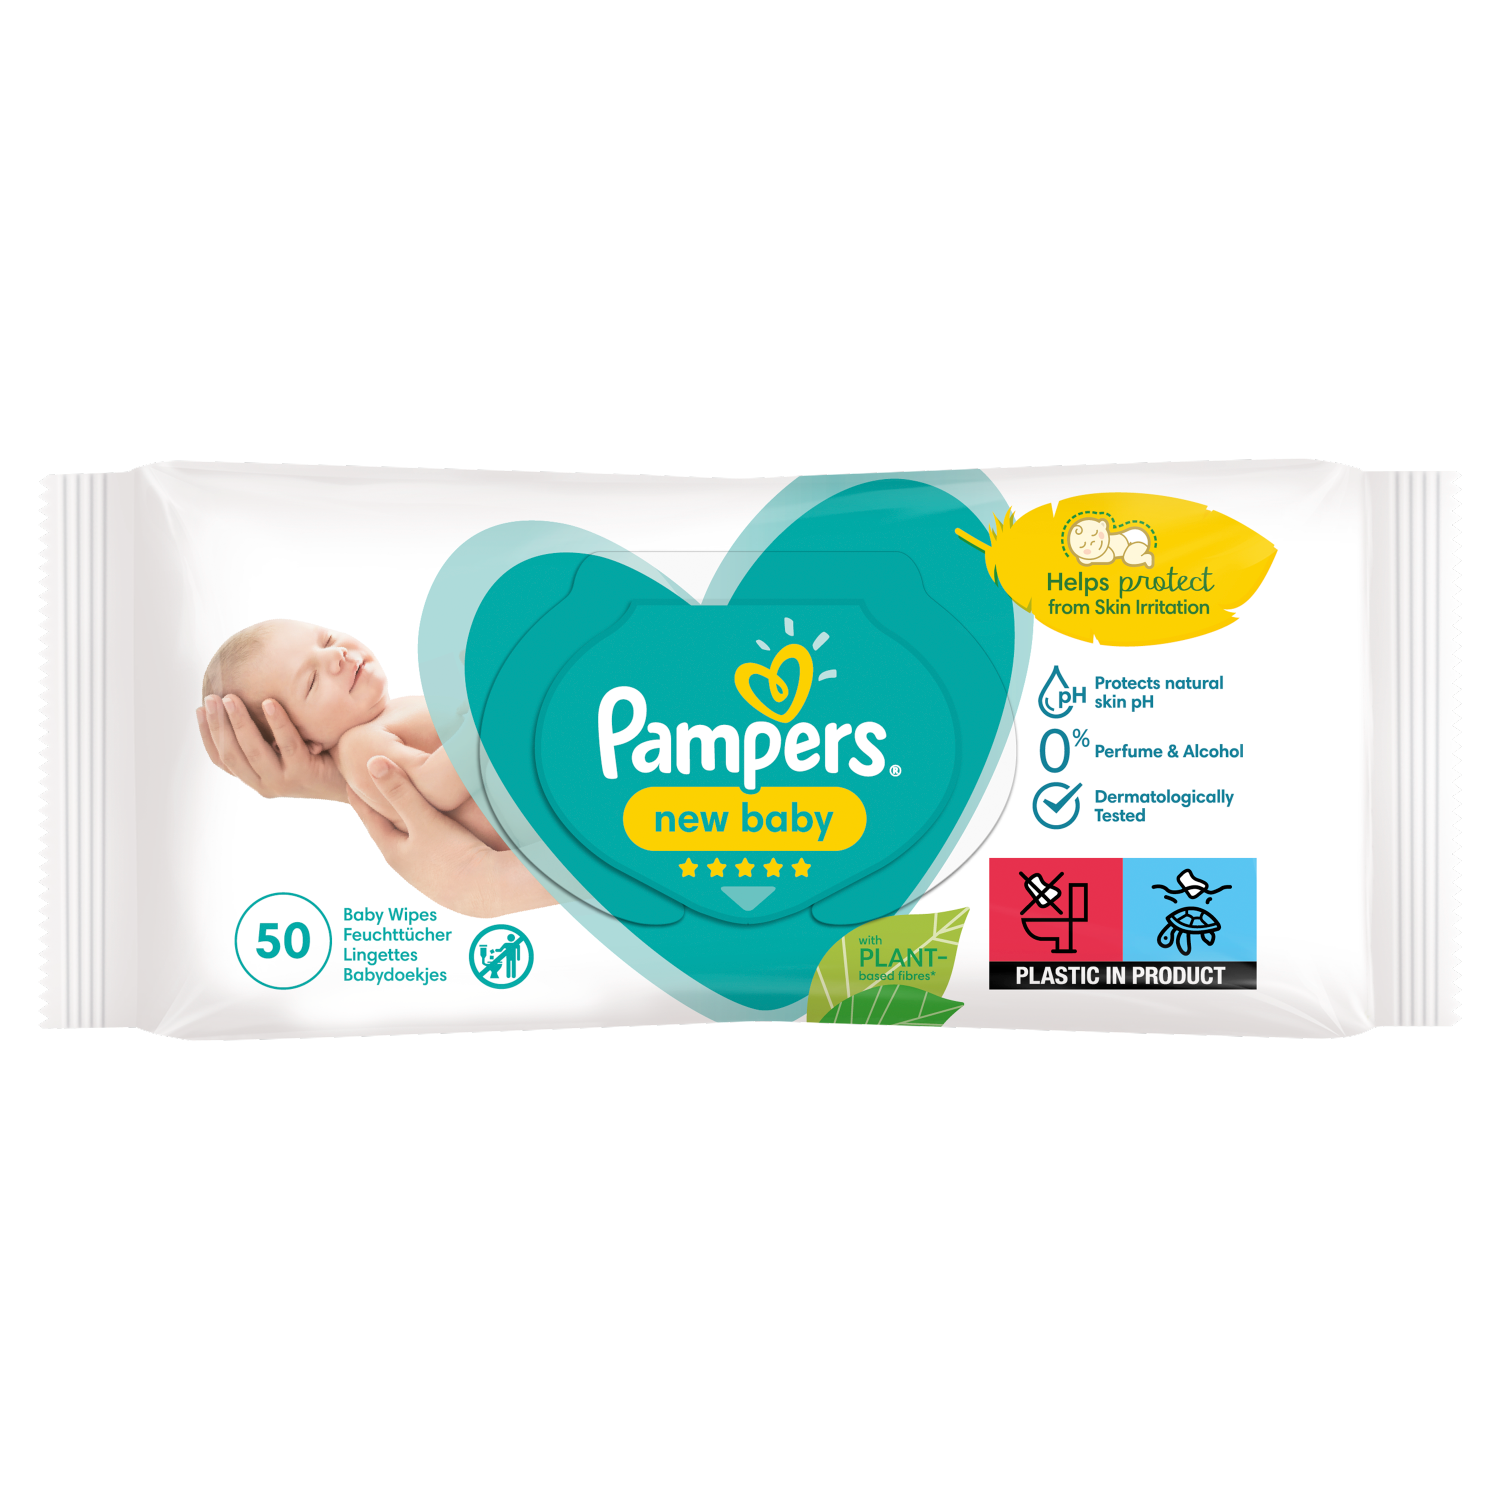 superpharm pampers aktiv baby dry